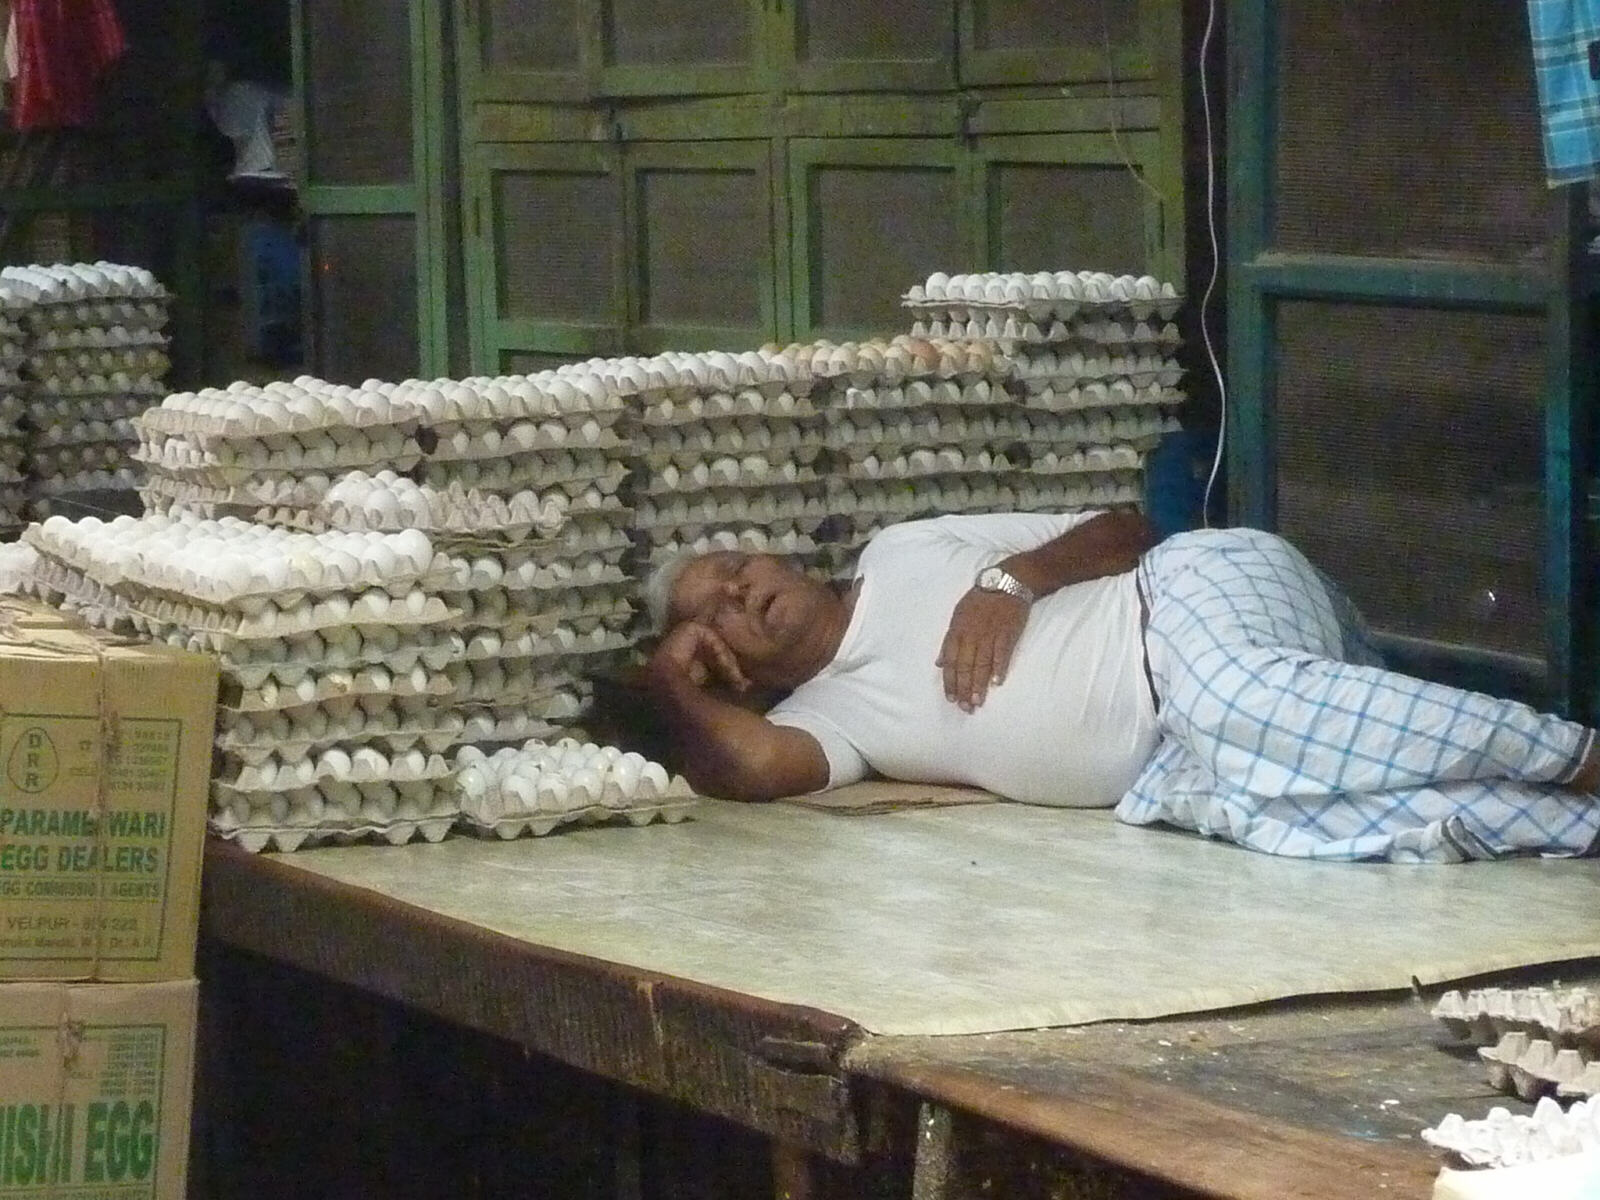 An egg stall in the New Market in Calcutta